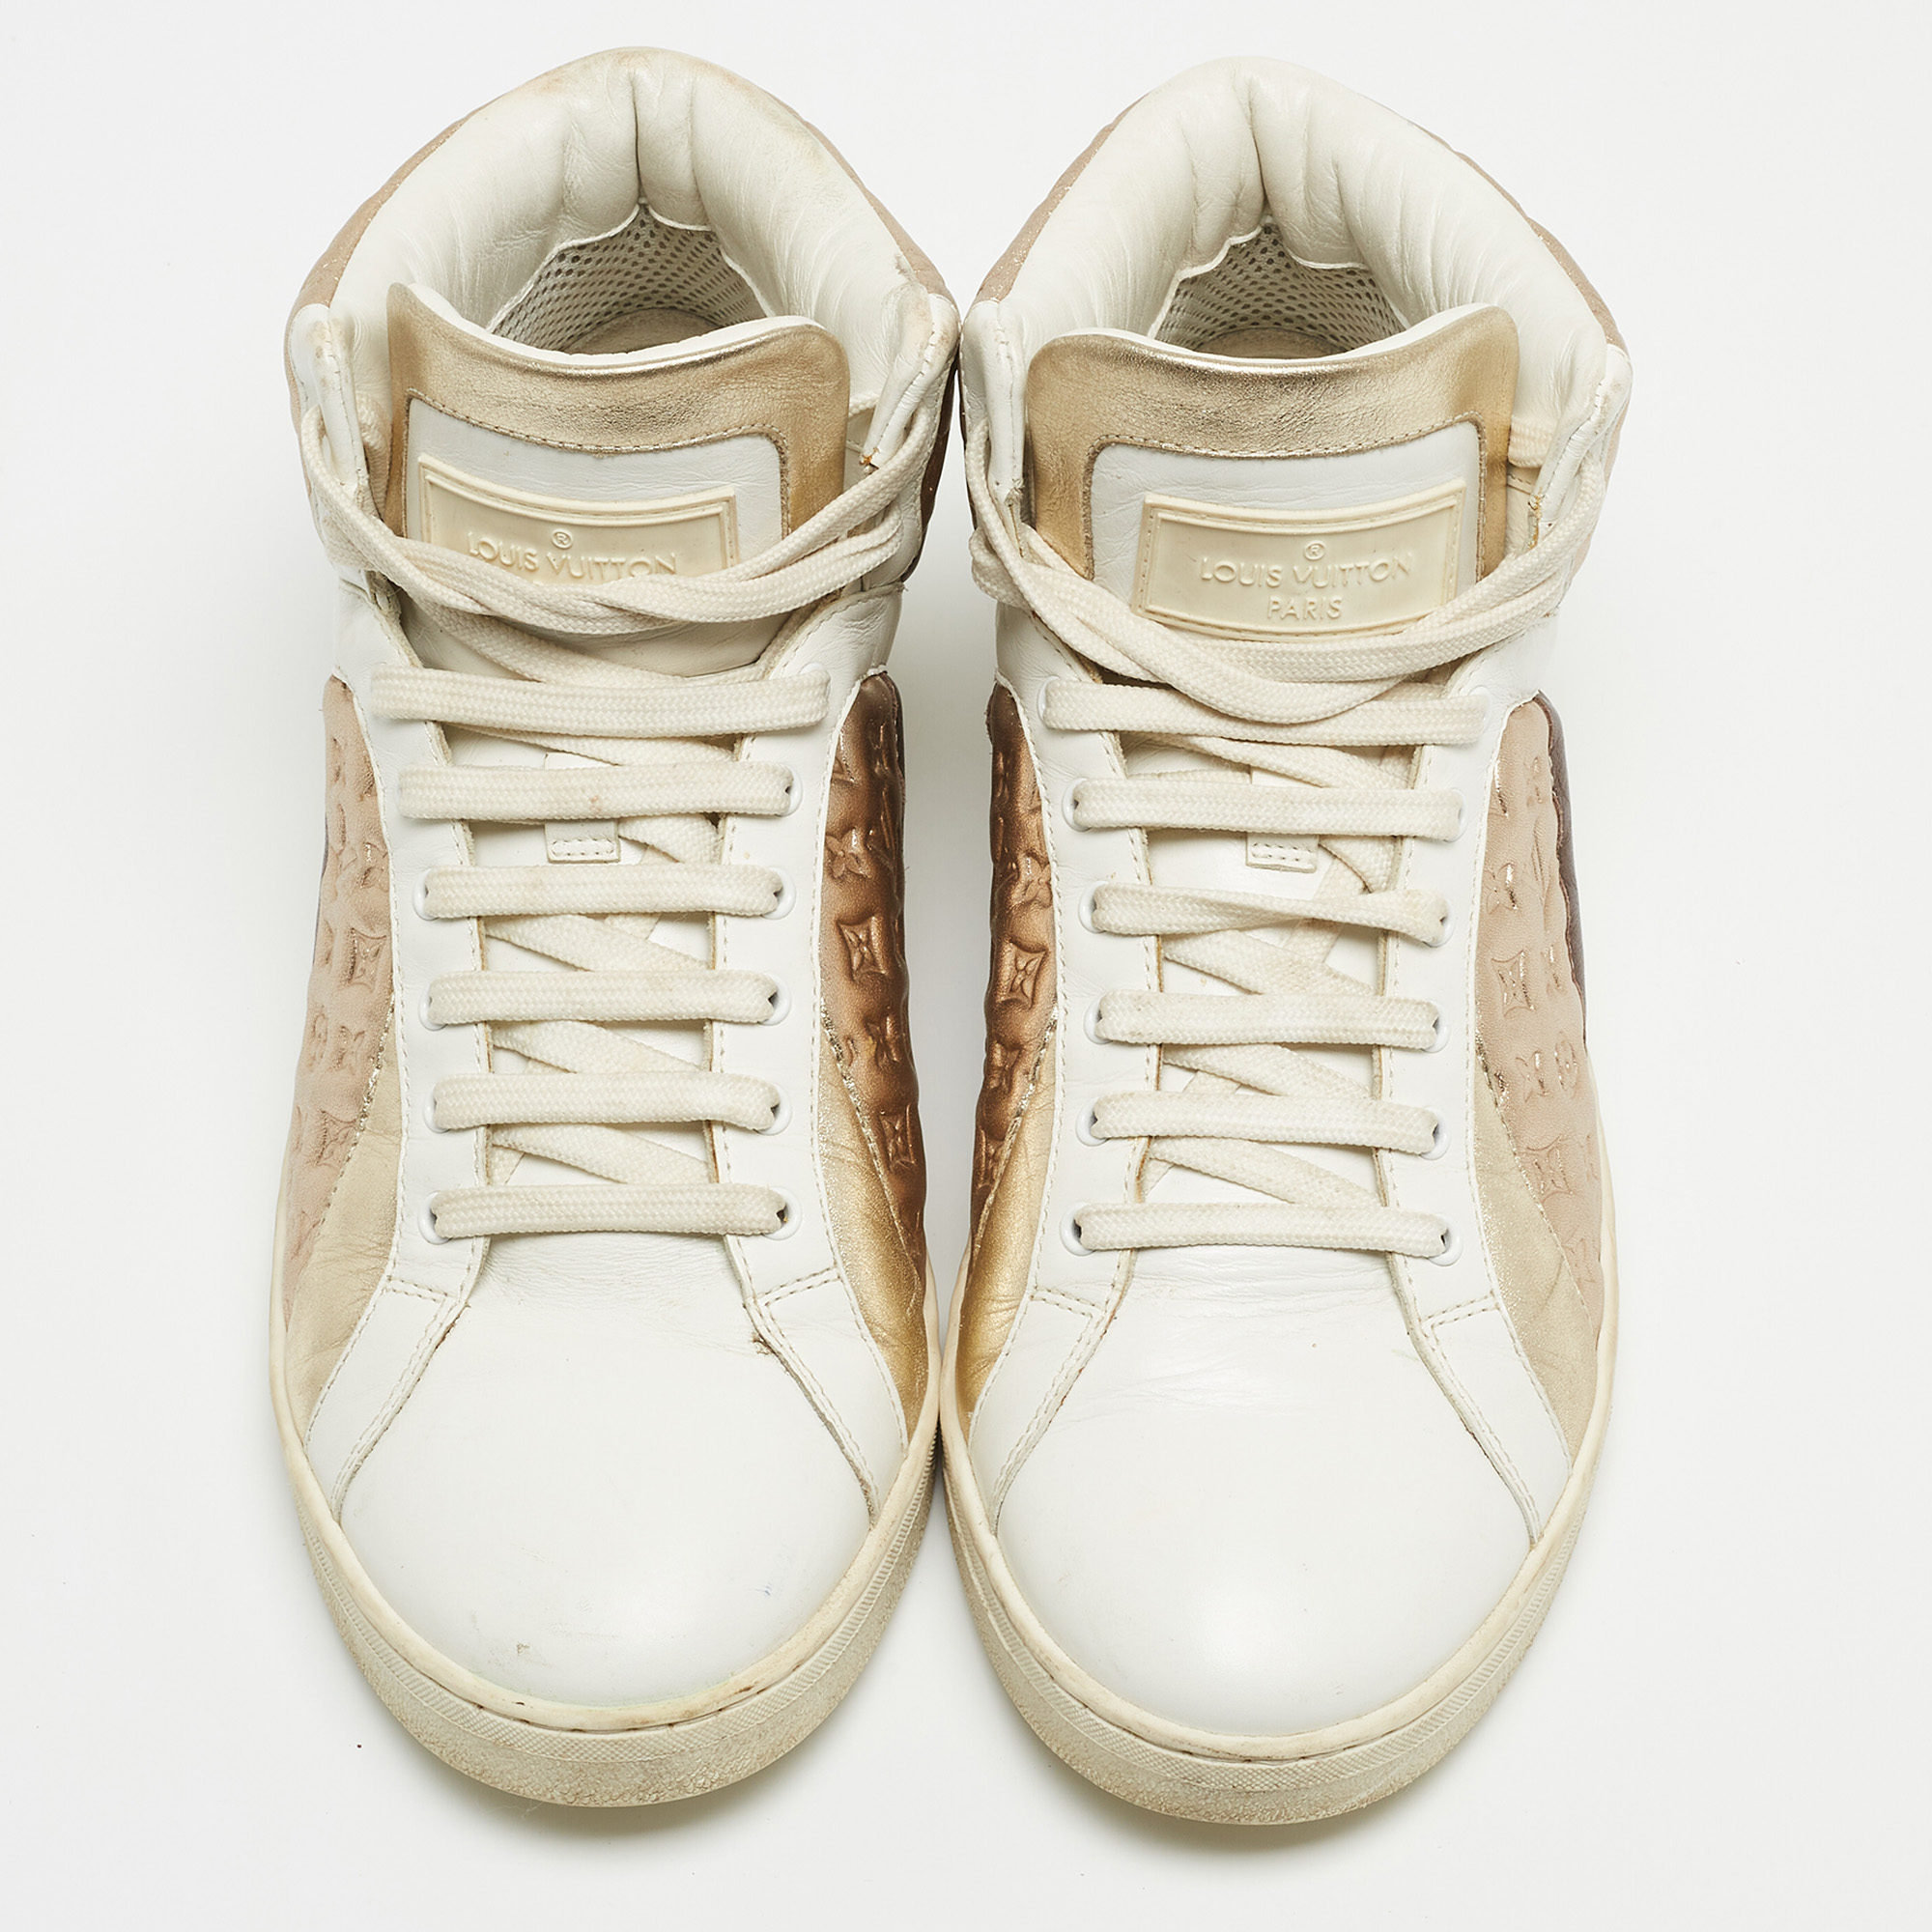 Louis Vuitton Metallic/White Leather And Canvas High Top Sneakers Size 38